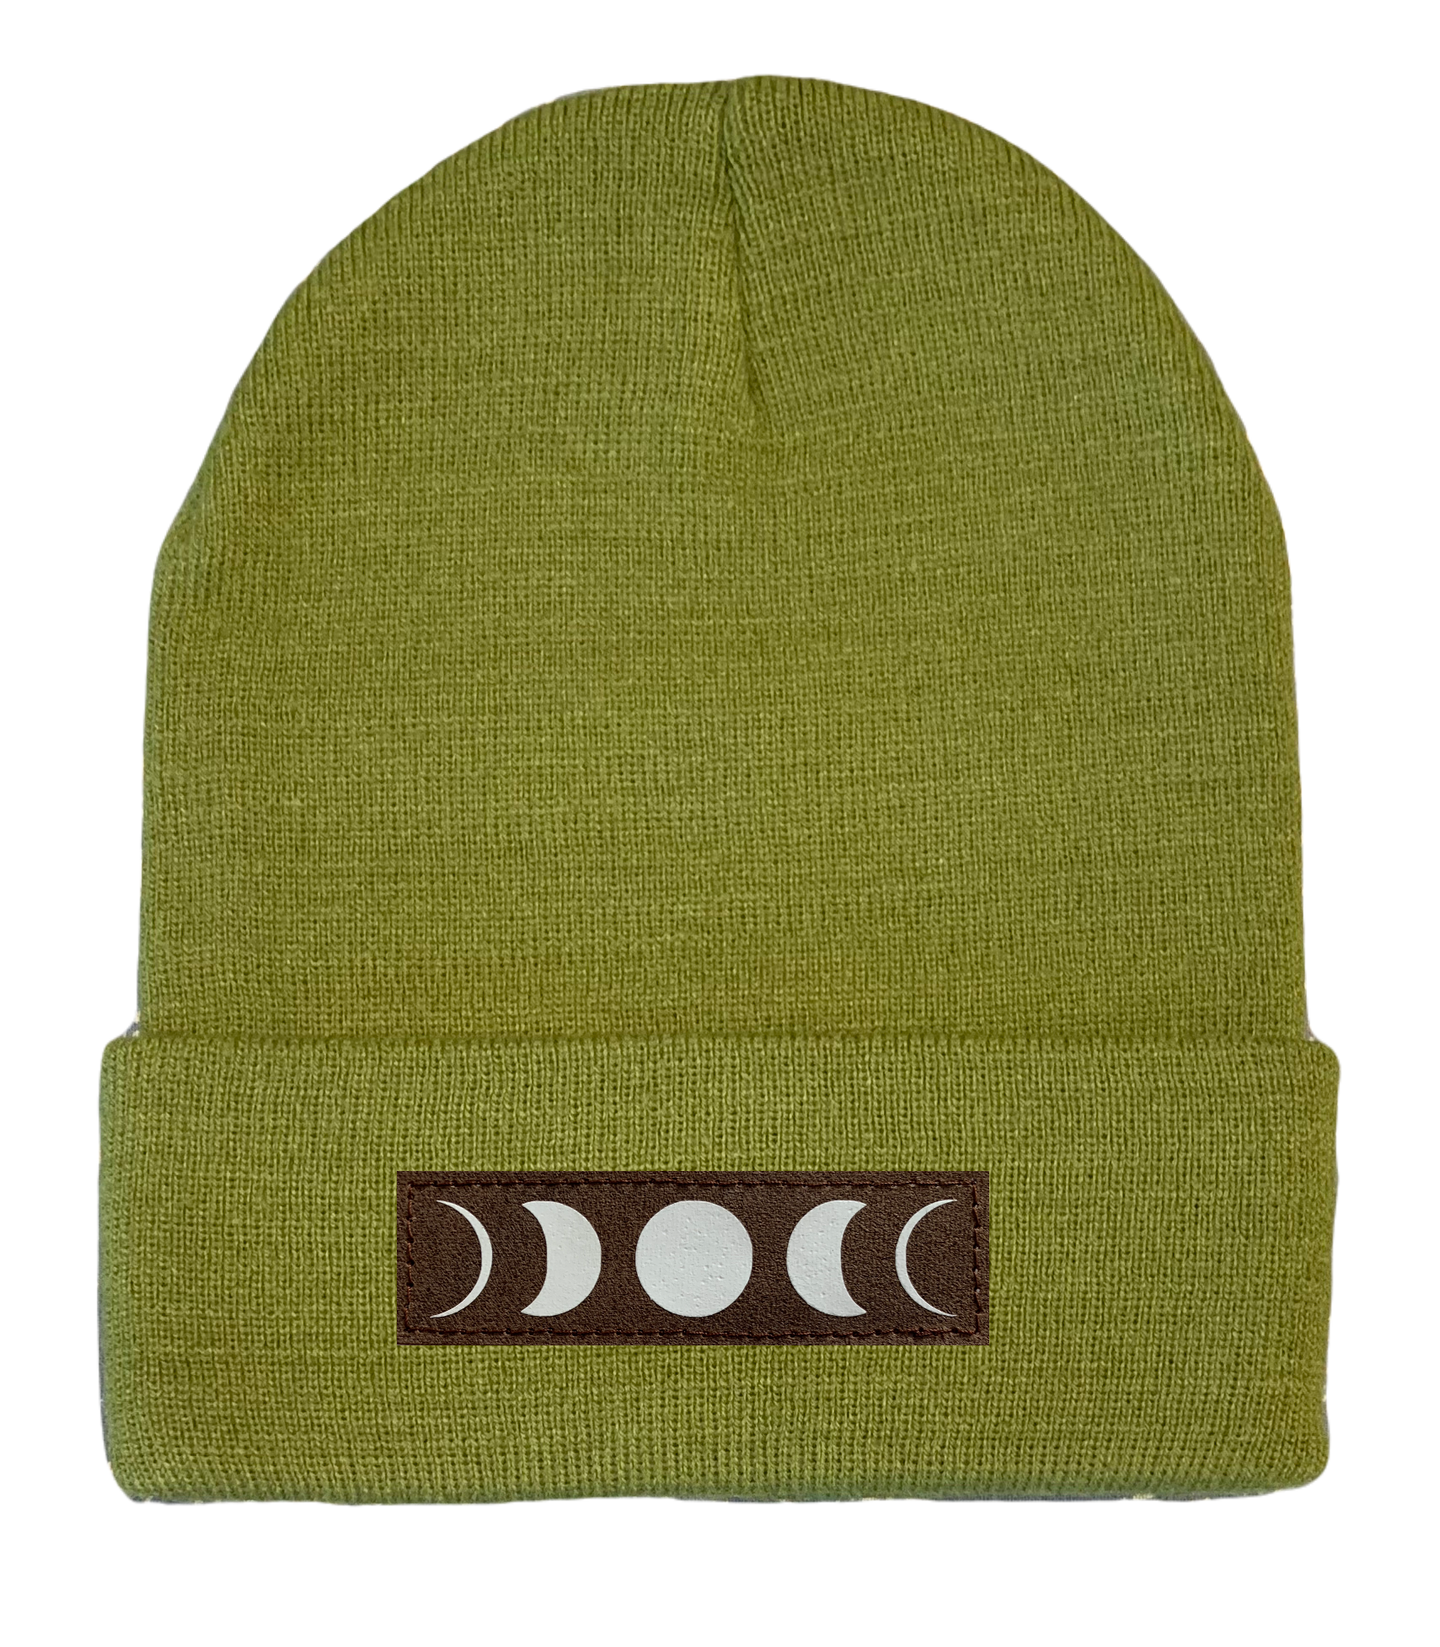 Cuffed beanie with vegan leather full moon phase patch over your third eye by buddha gear